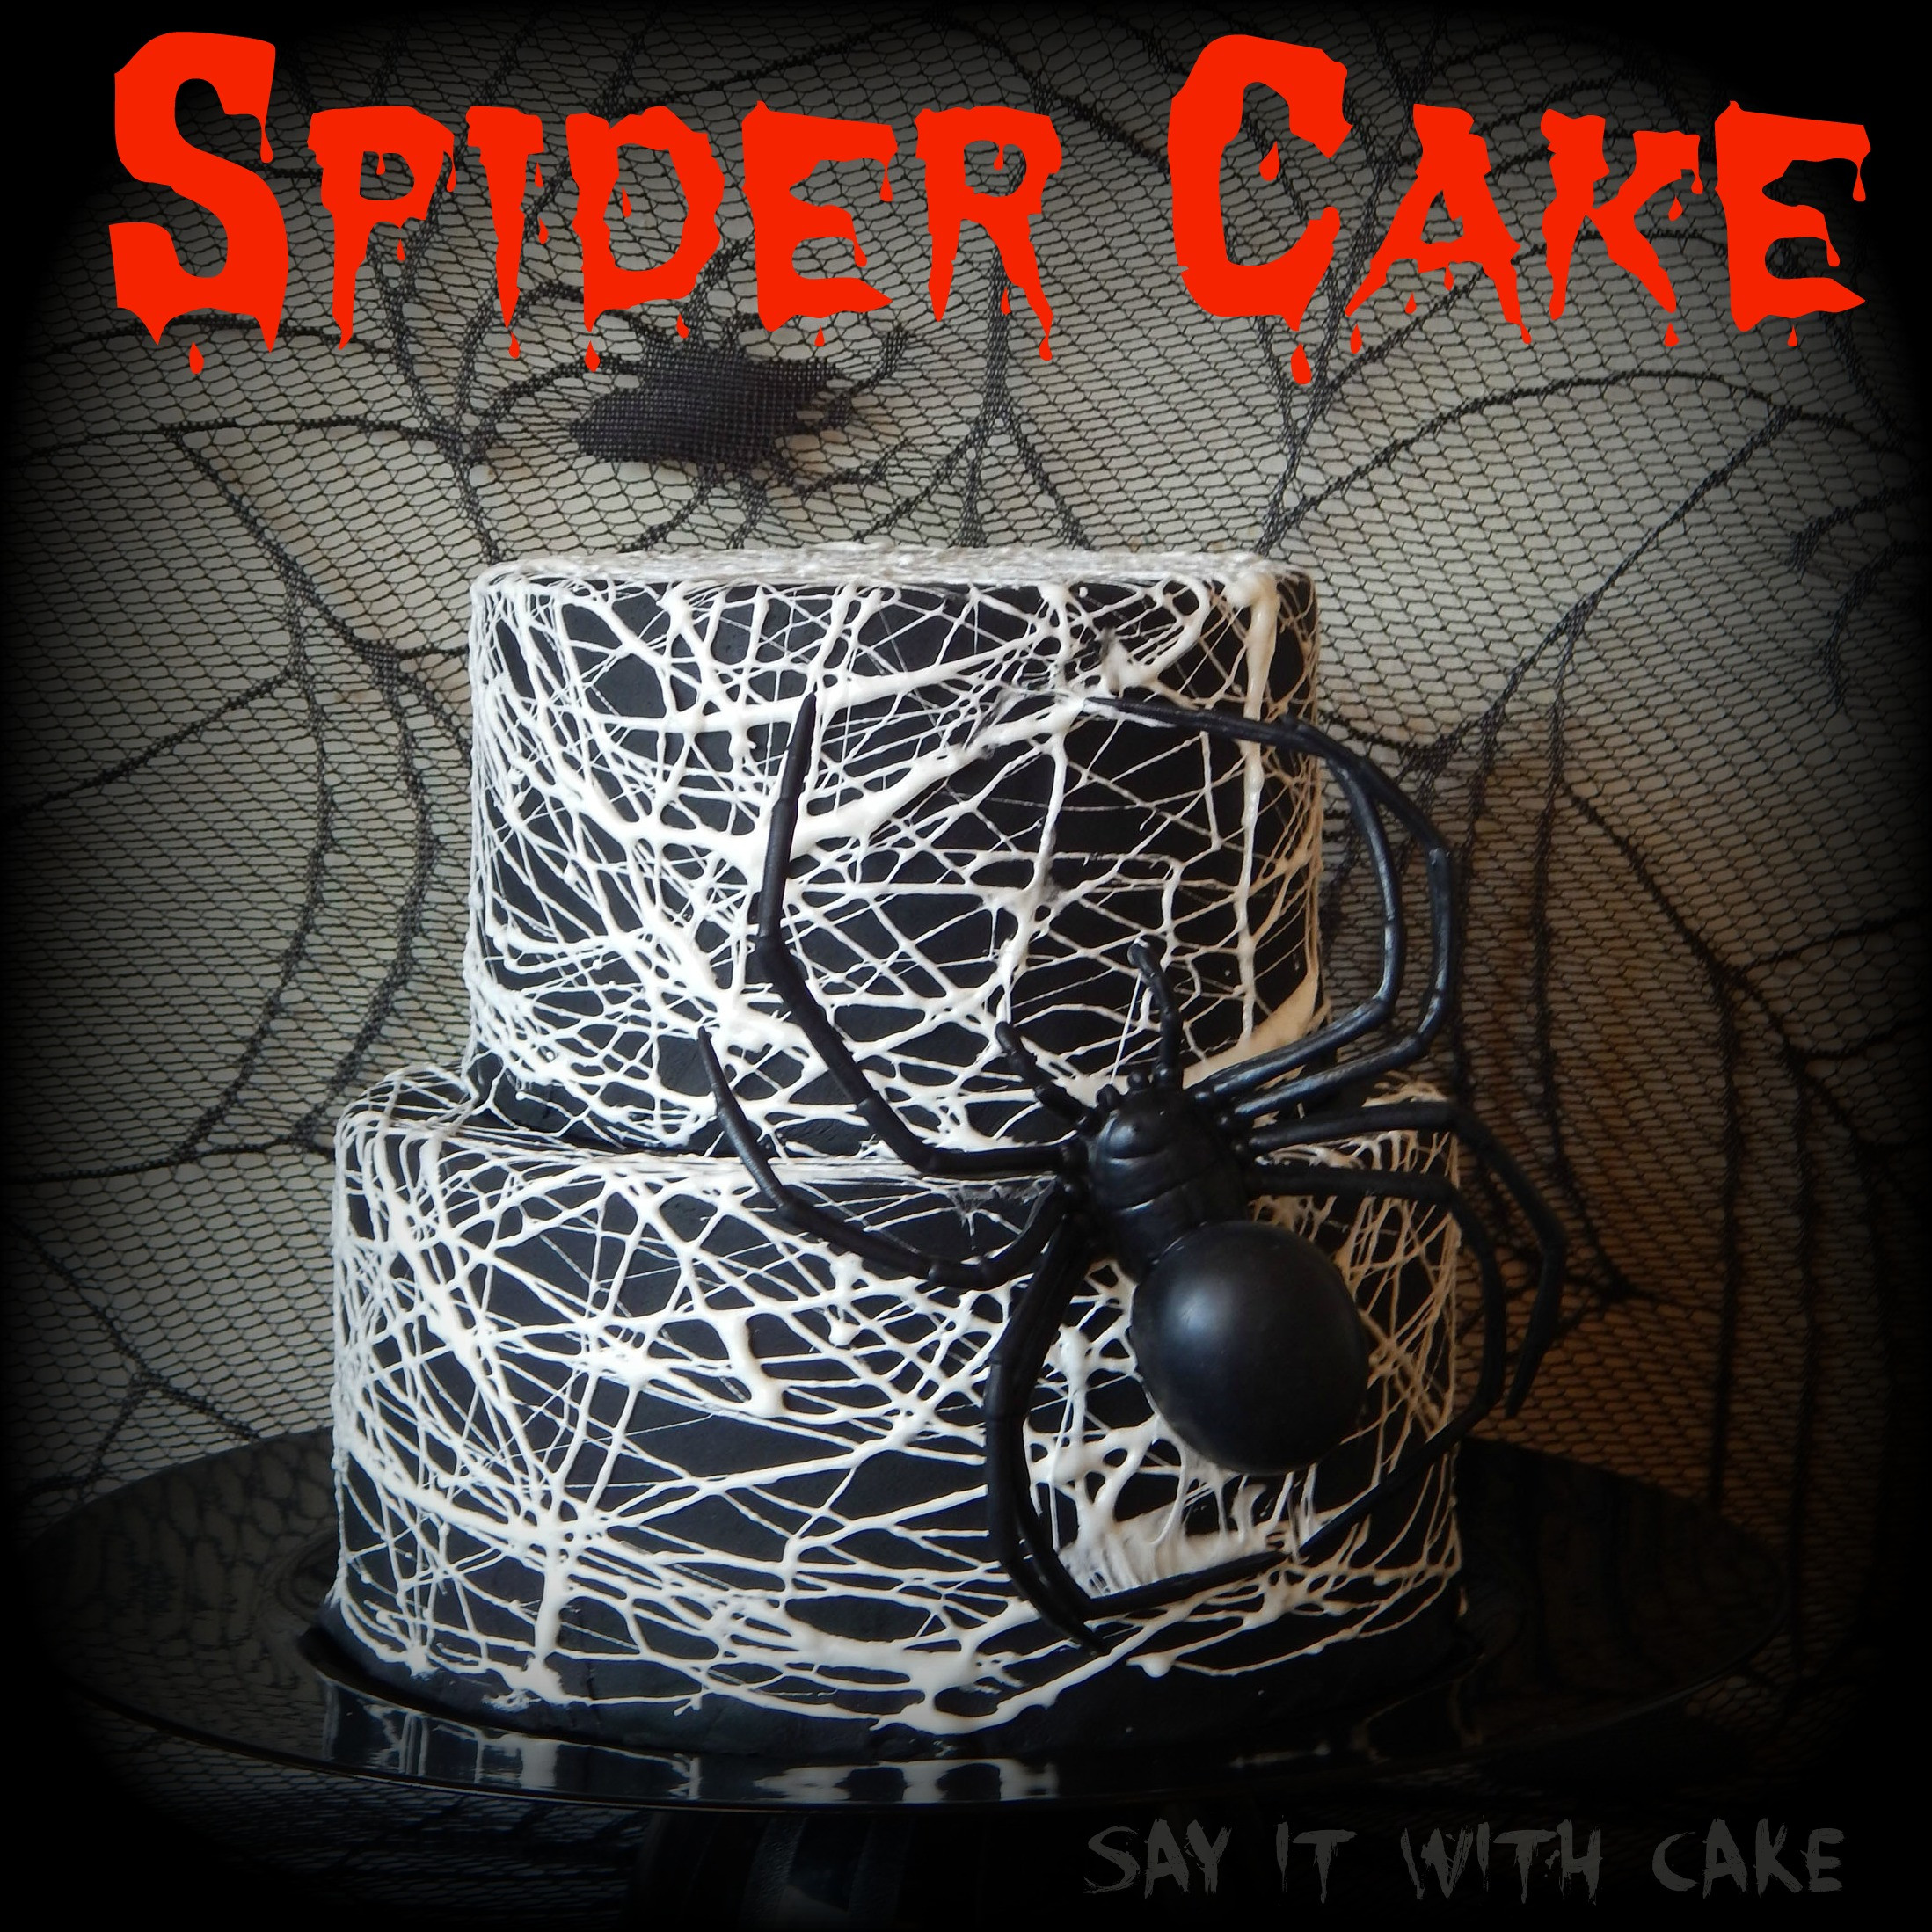 Halloween Spider Cakes
 Spider Web Cake – Say it With Cake